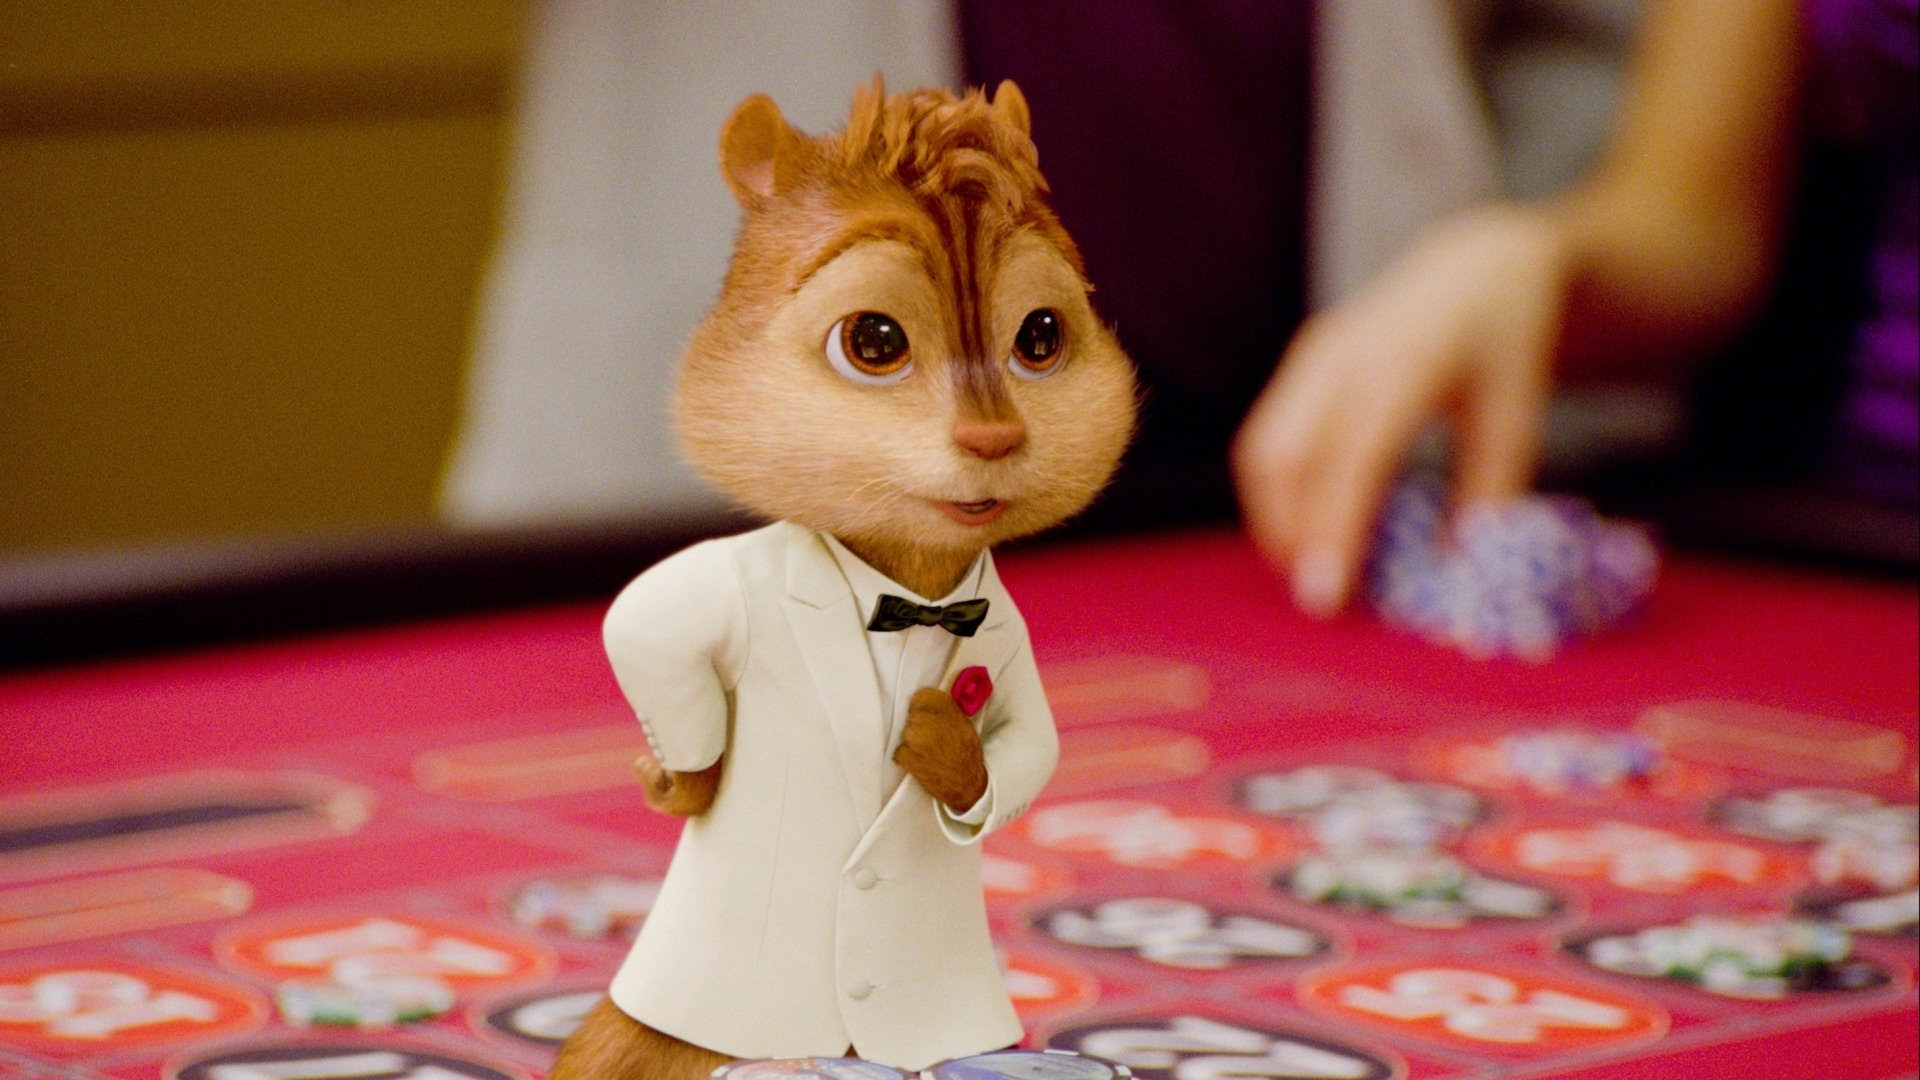 Alvin And The Chipmunks: Chipwrecked - Movies on Google Play